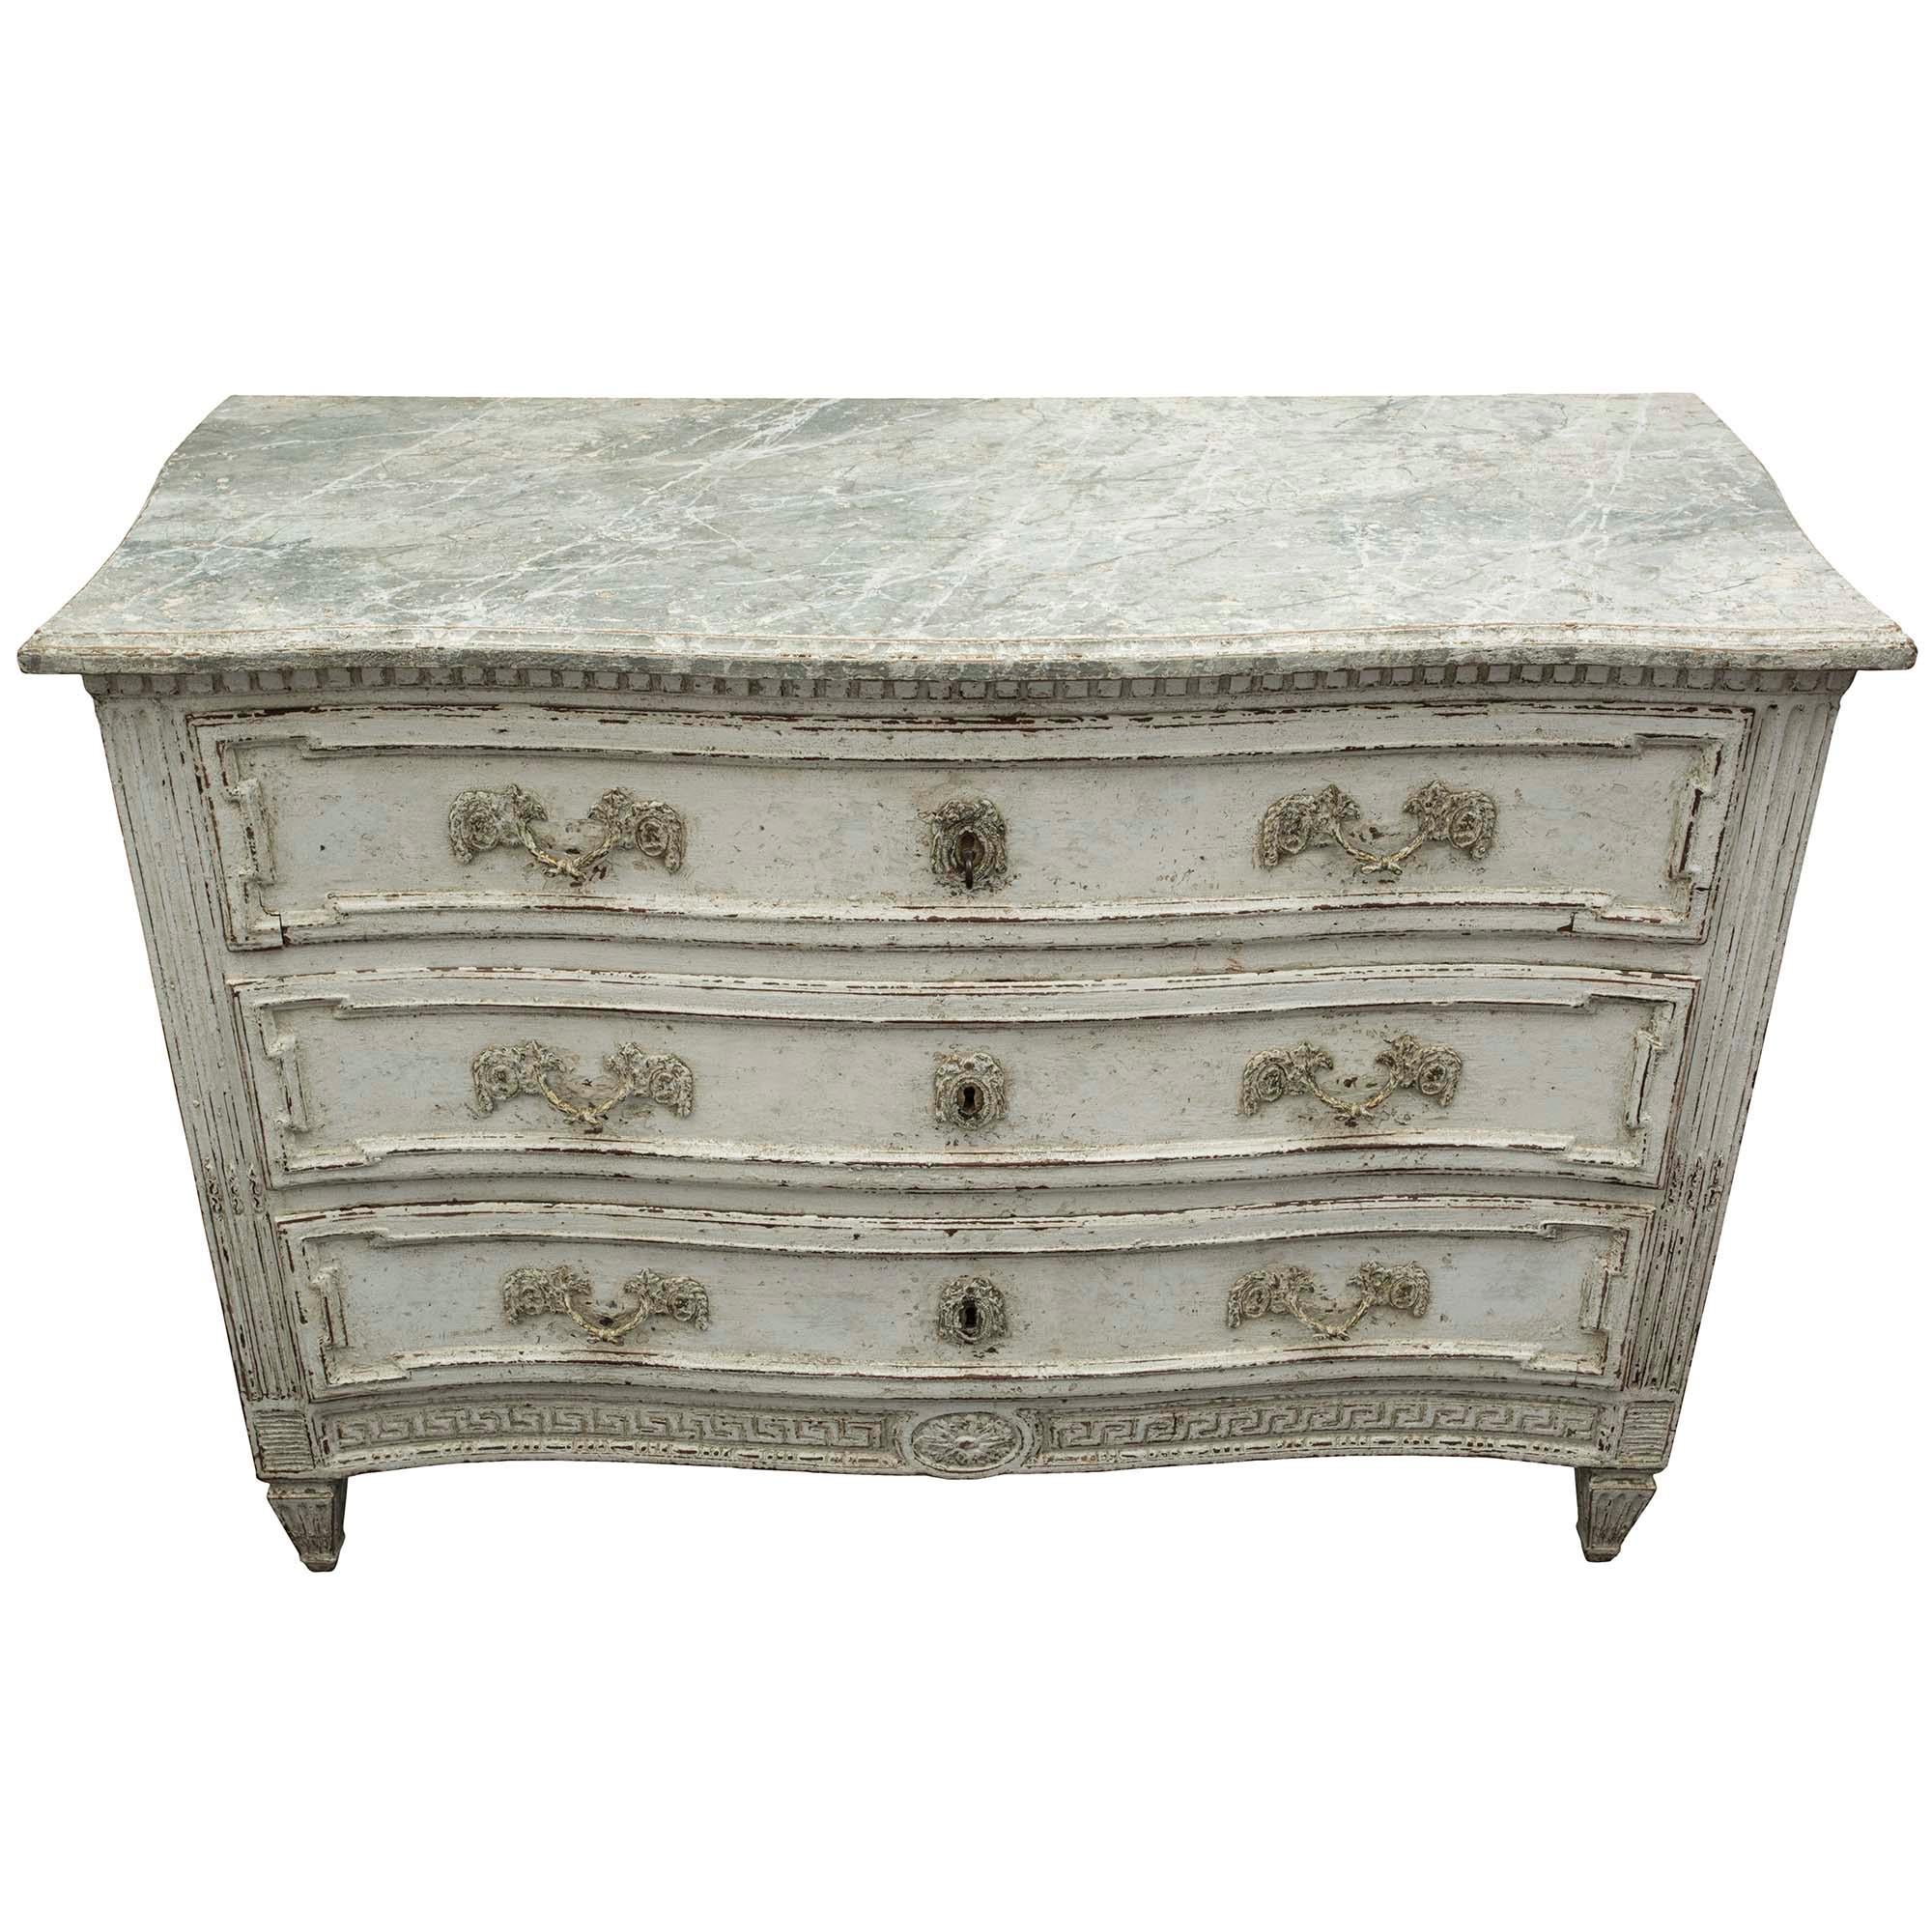 A most elegant country French 19th century Louis XVI style three-drawer commode with a wonderful patinated finish and faux marble top. The commode is raised by square tapered legs below vertical fluted columns with carved chandelles. The bottom